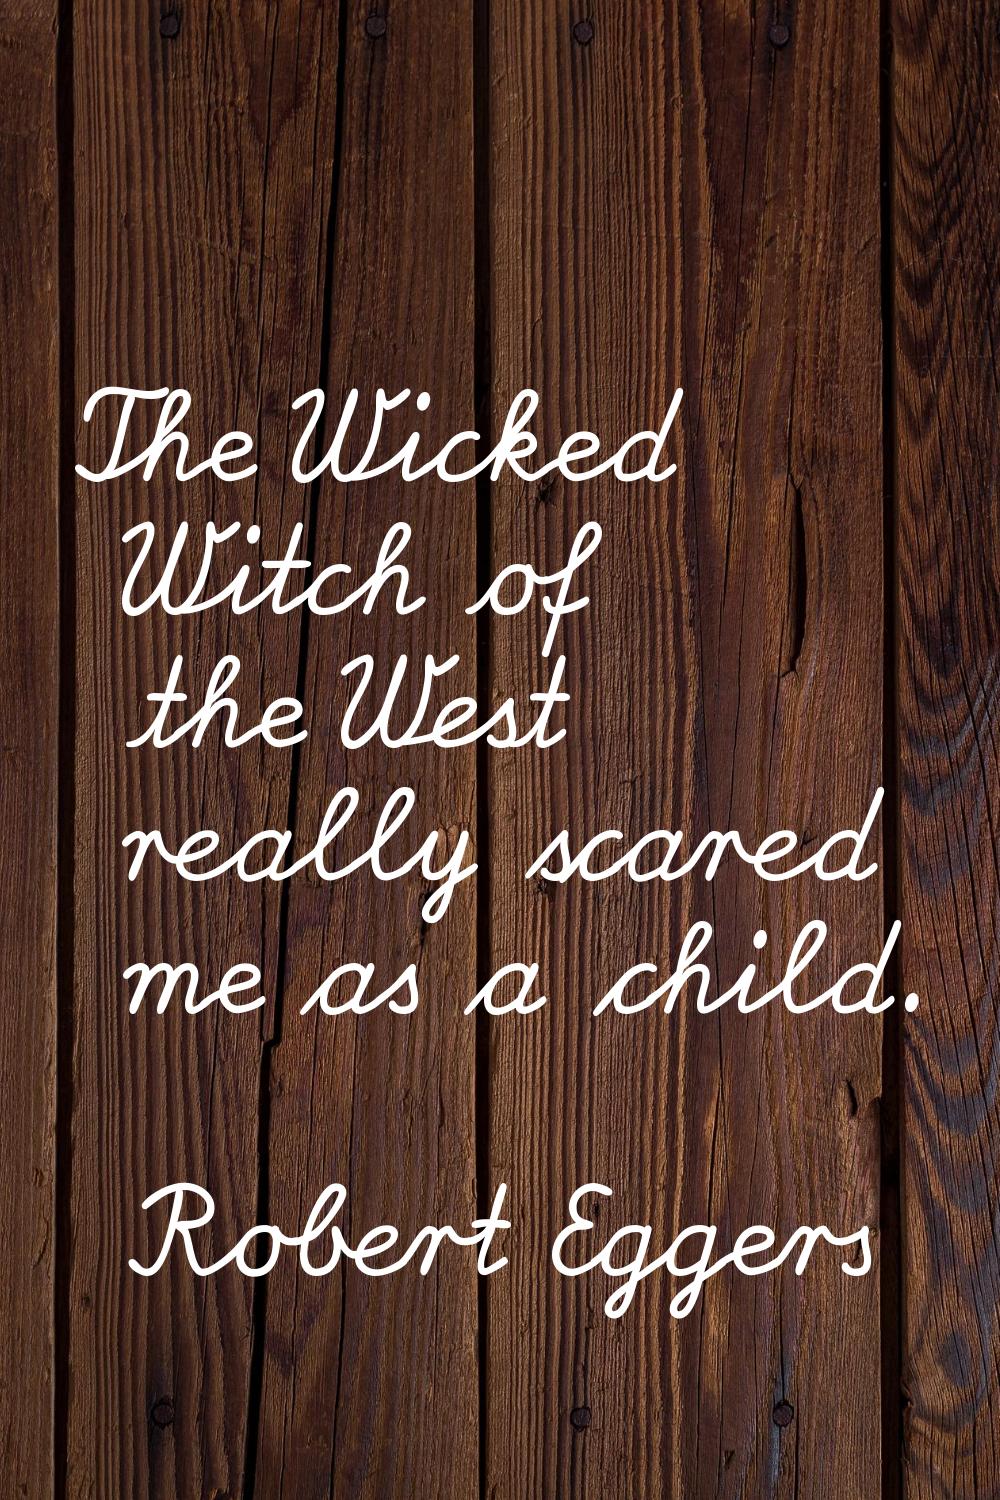 The Wicked Witch of the West really scared me as a child.